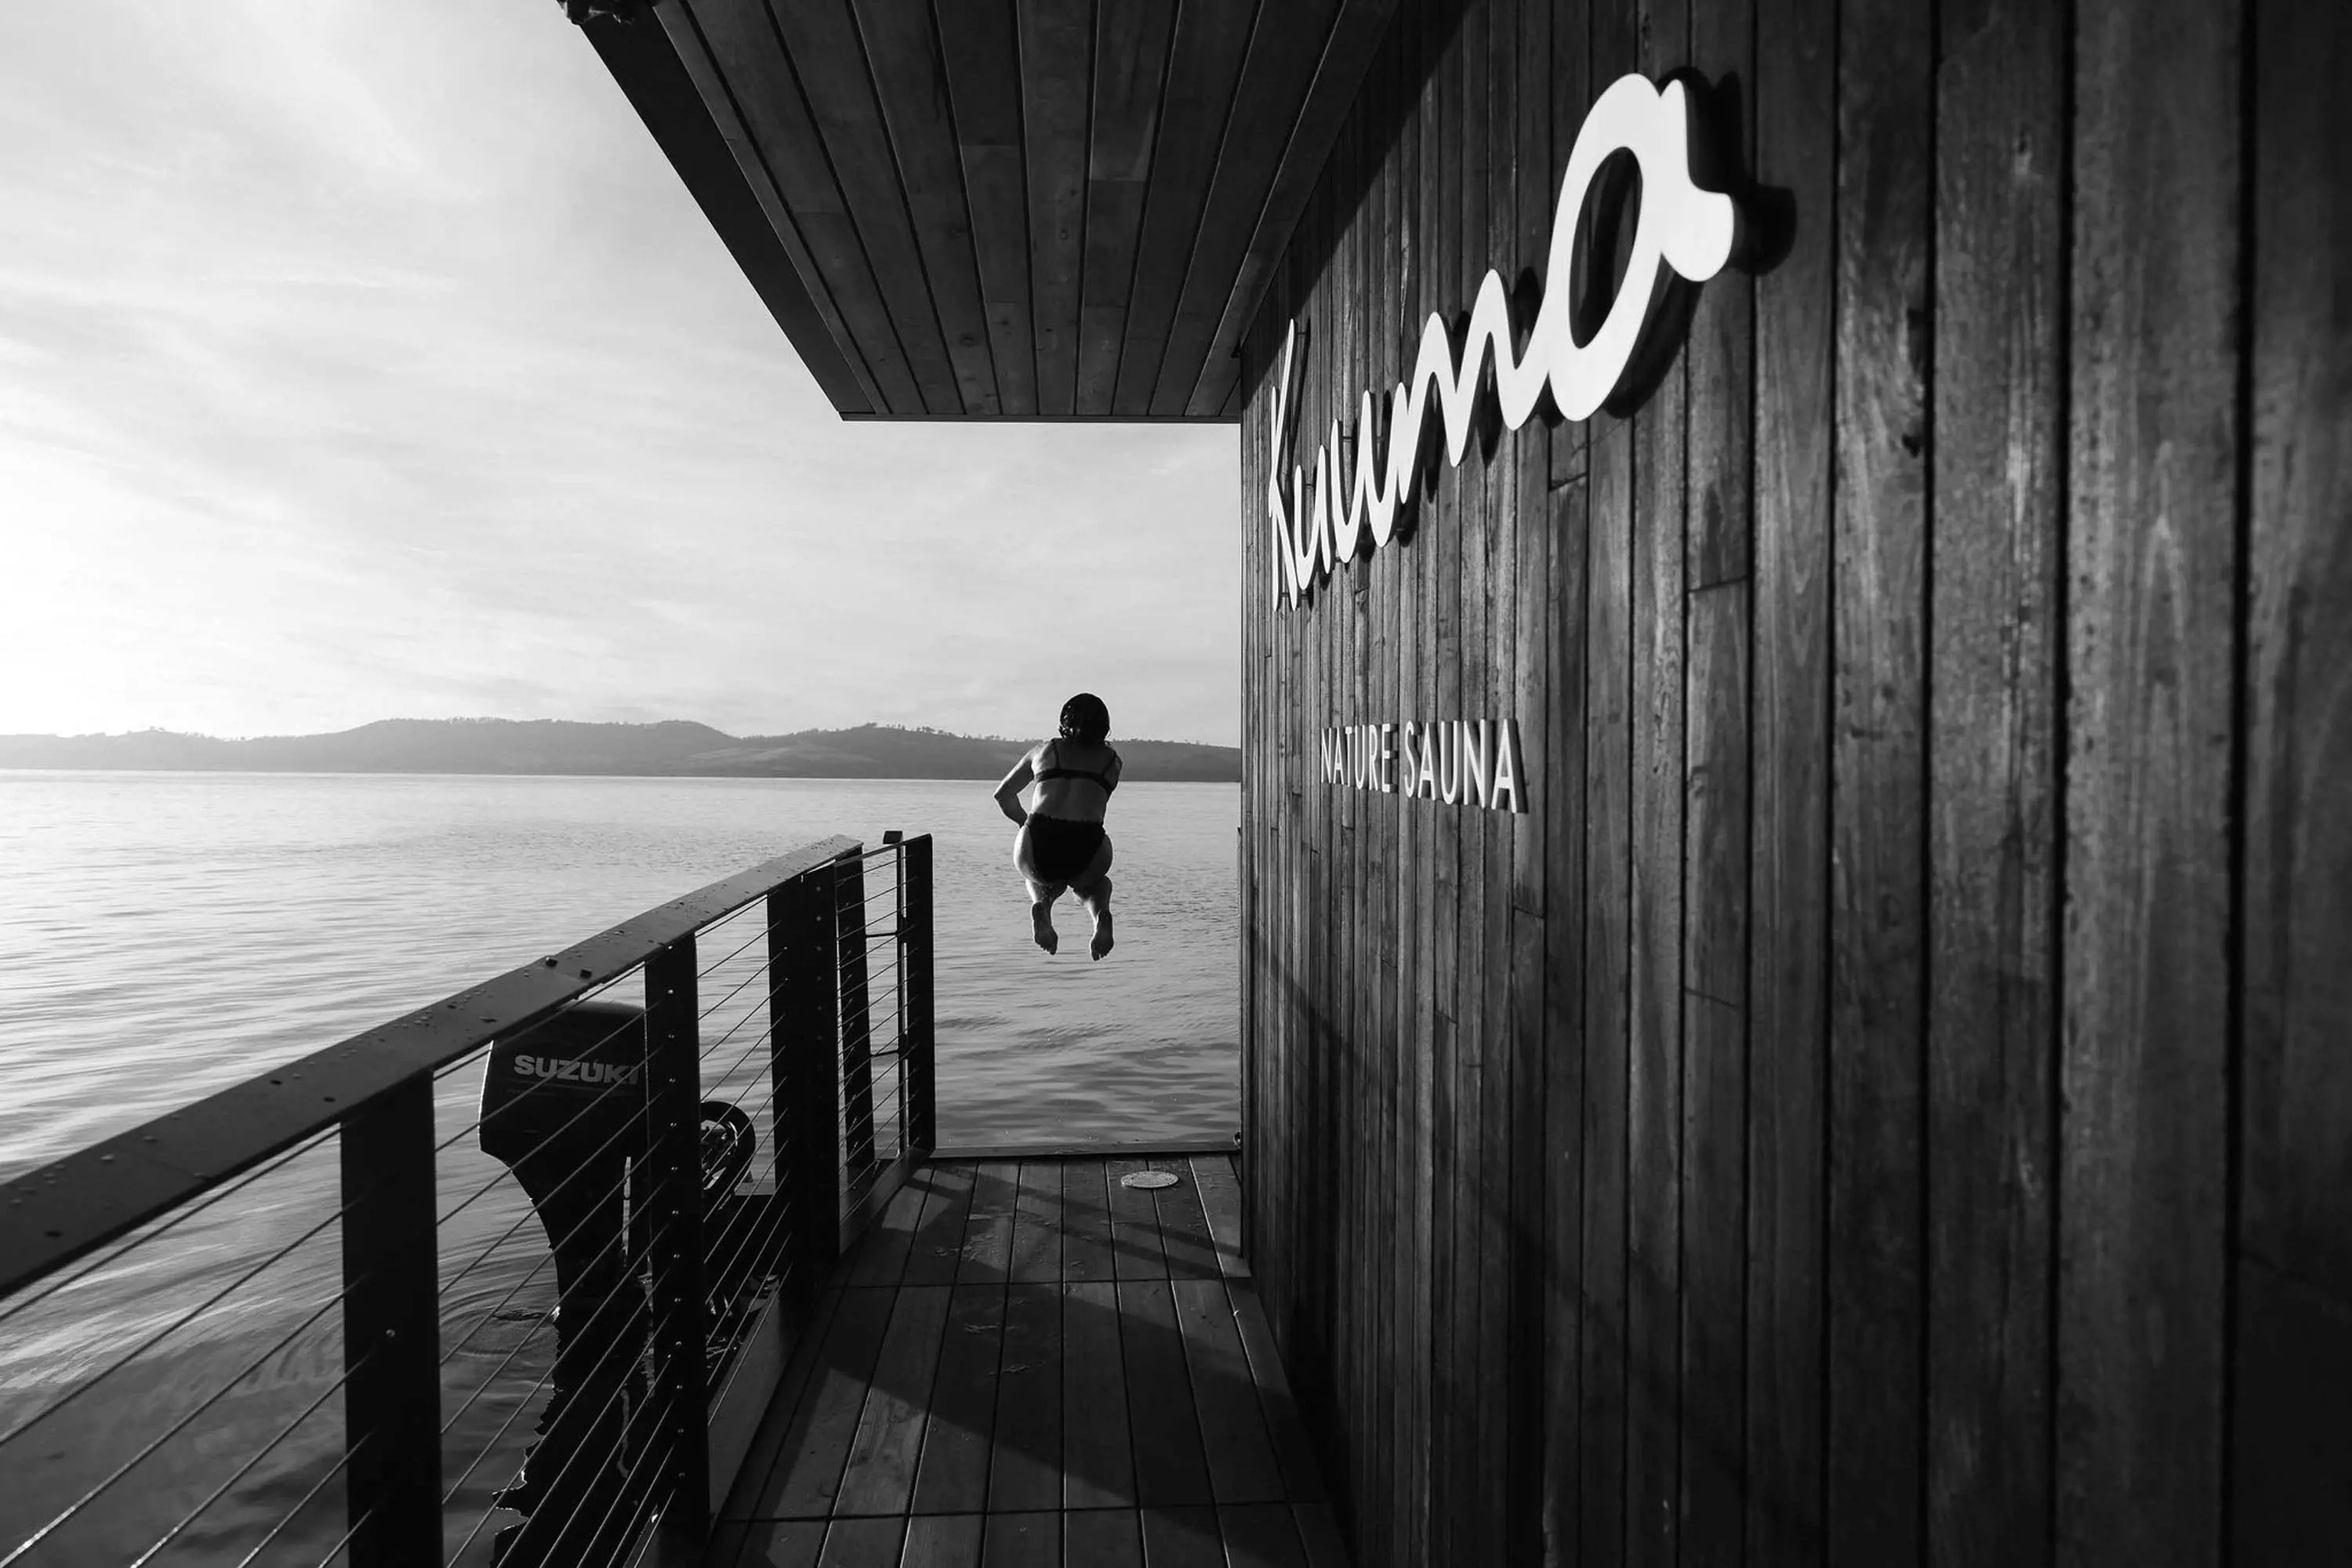 A woman jumps from the end of a patio attached to a floating sauna into water.